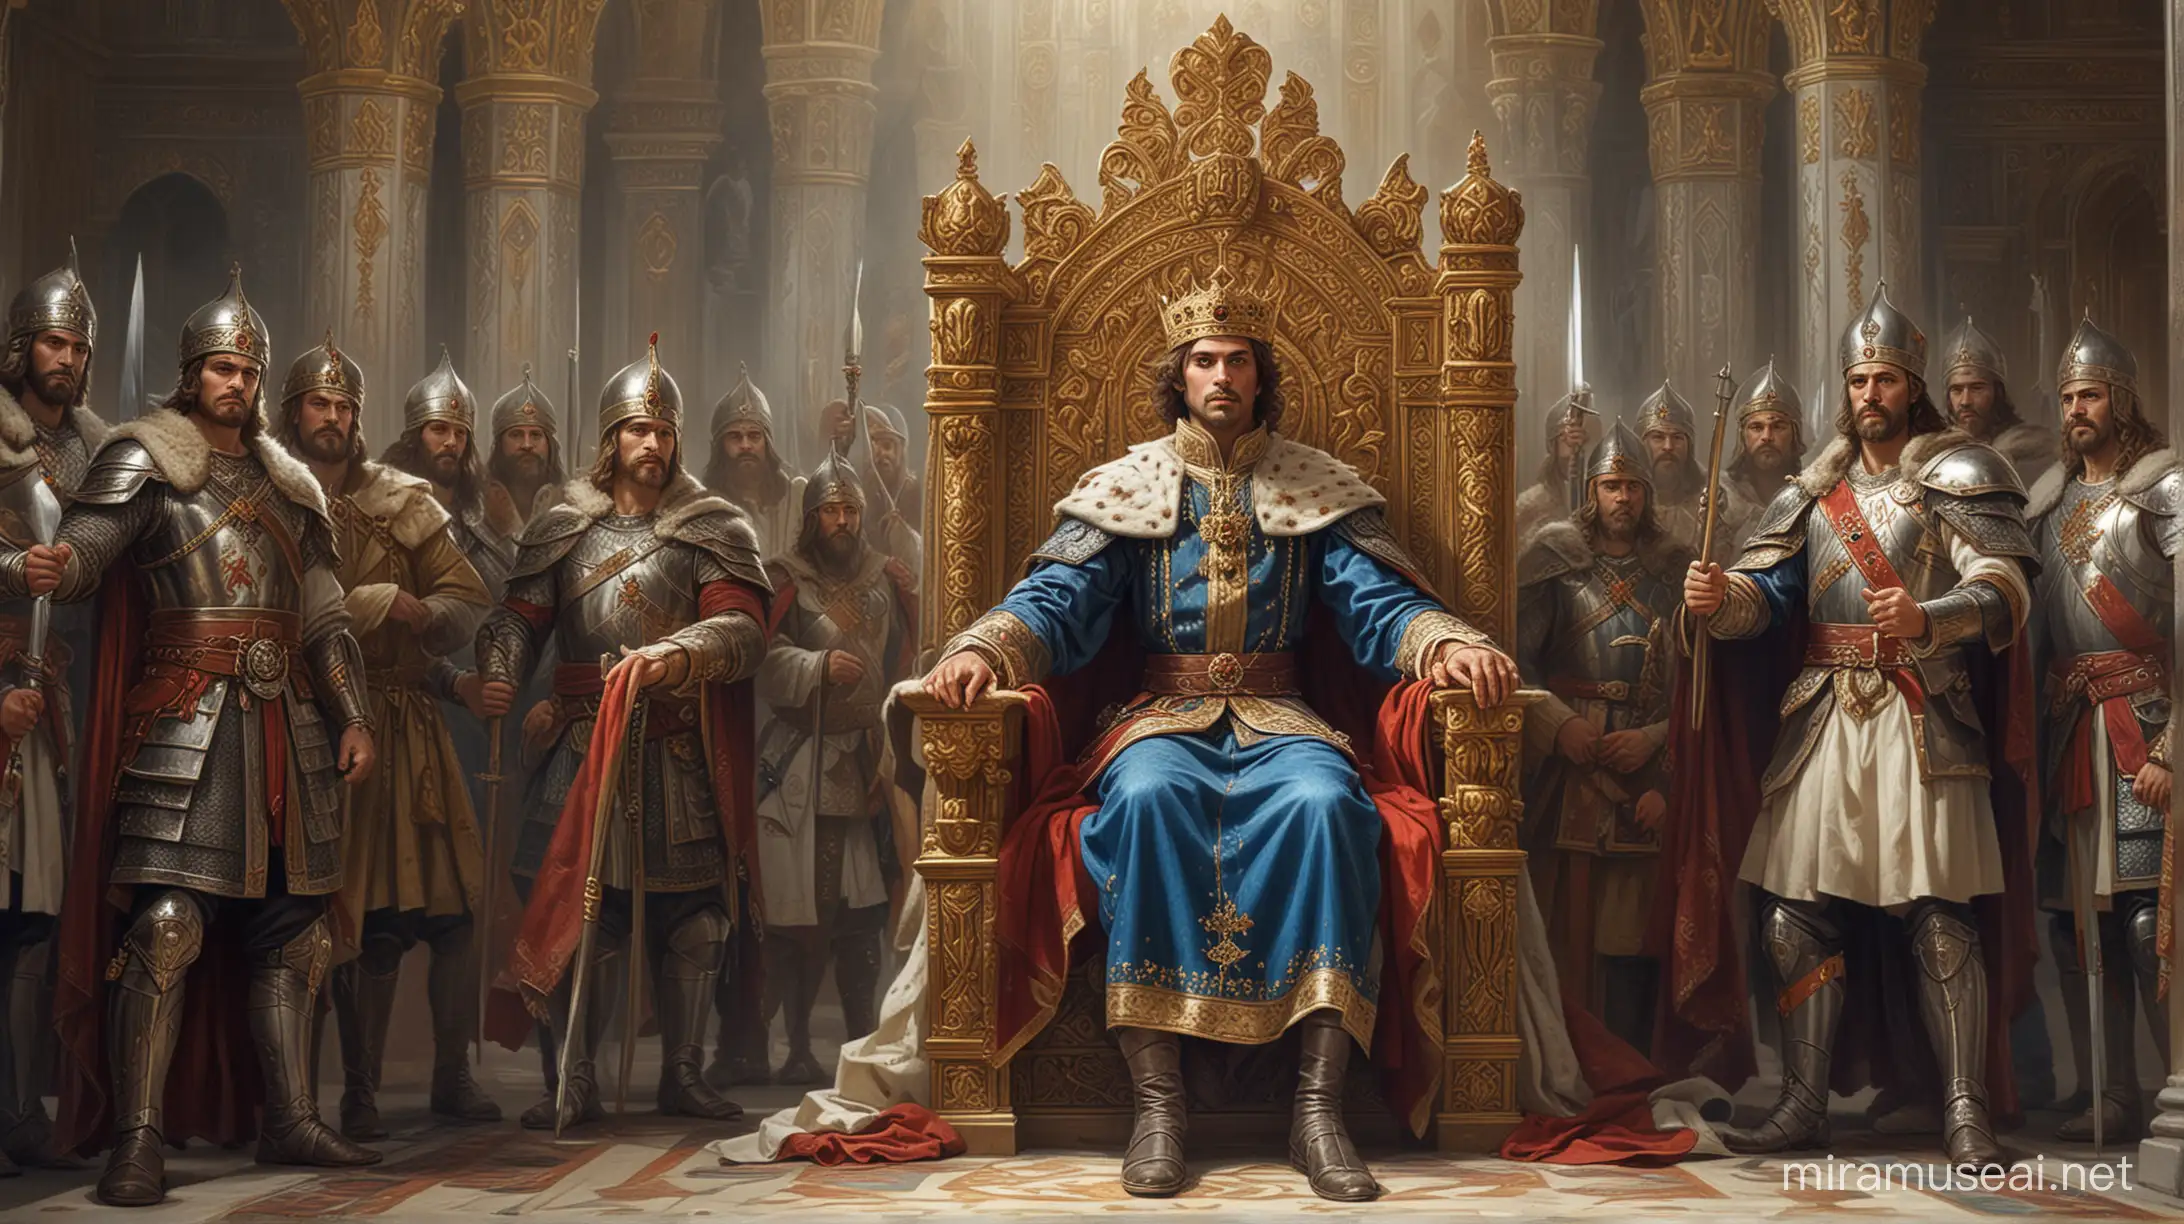 Prince on the throne: Draw a picture of the prince of ancient Russia sitting on a throne in his palace, surrounded by boyars and warriors symbolizing his authority and power.